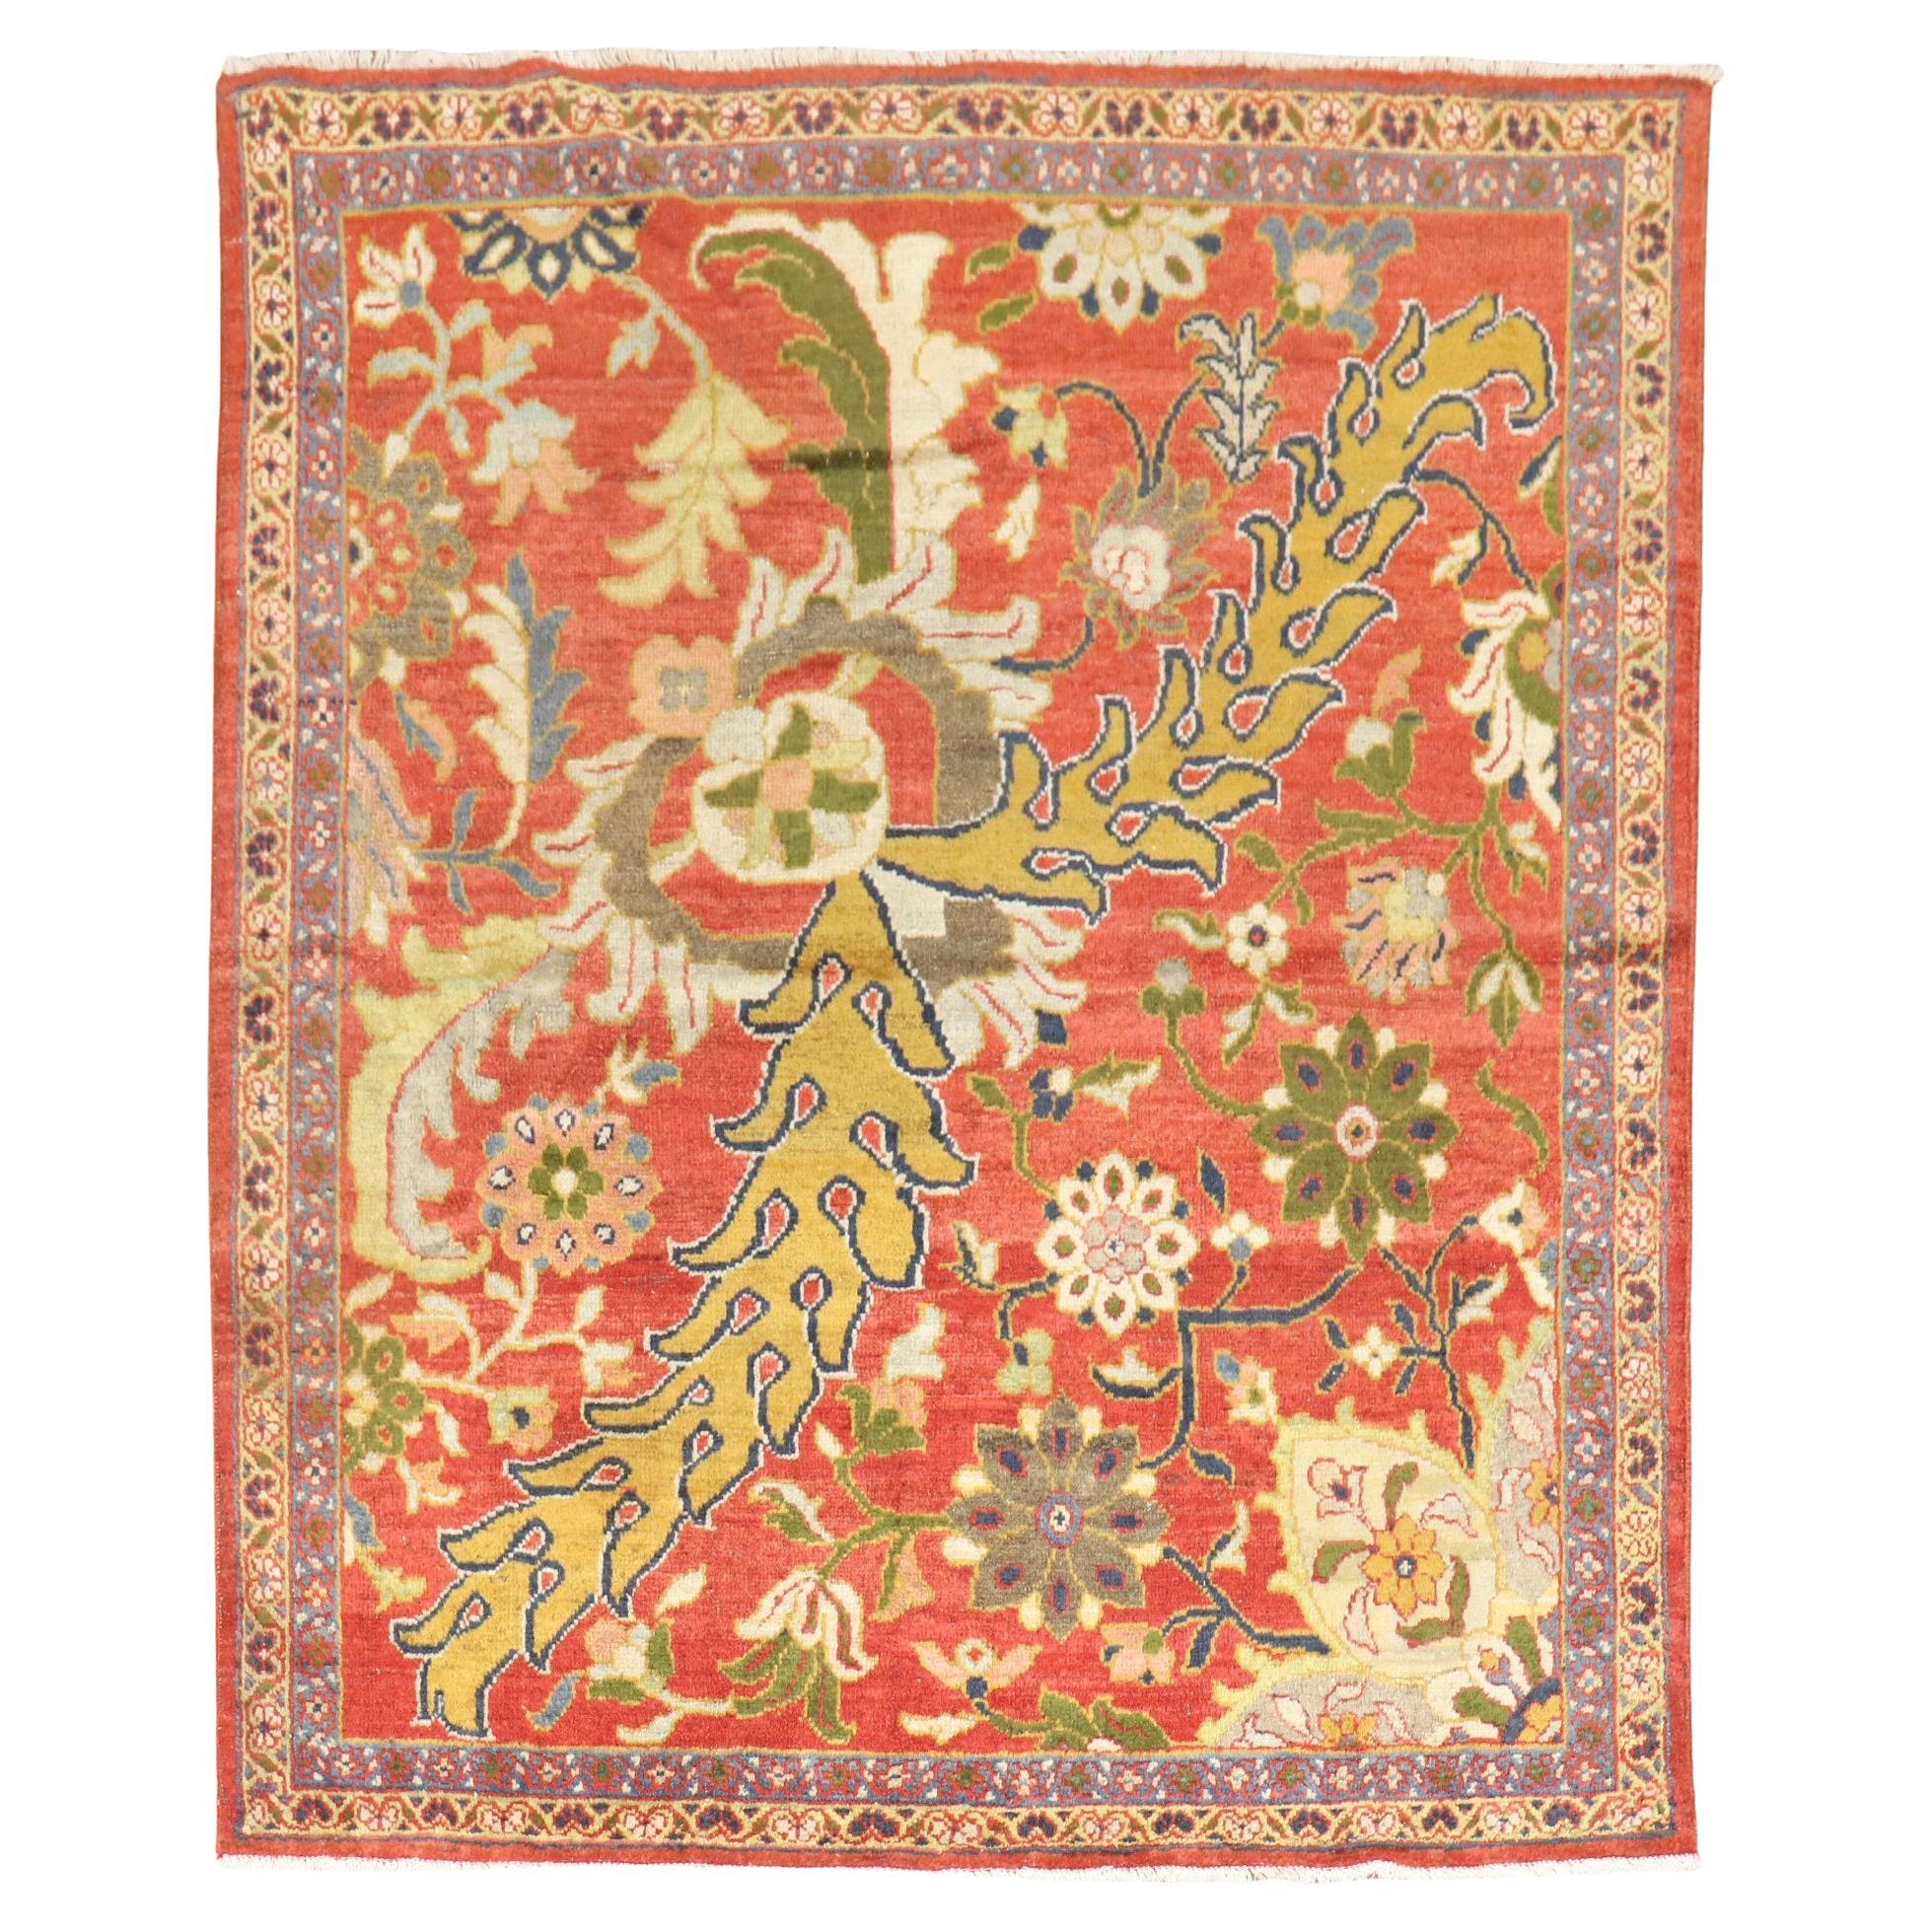 Magnificent Antique Persian Sultanabad Sampler 19th Century Rug